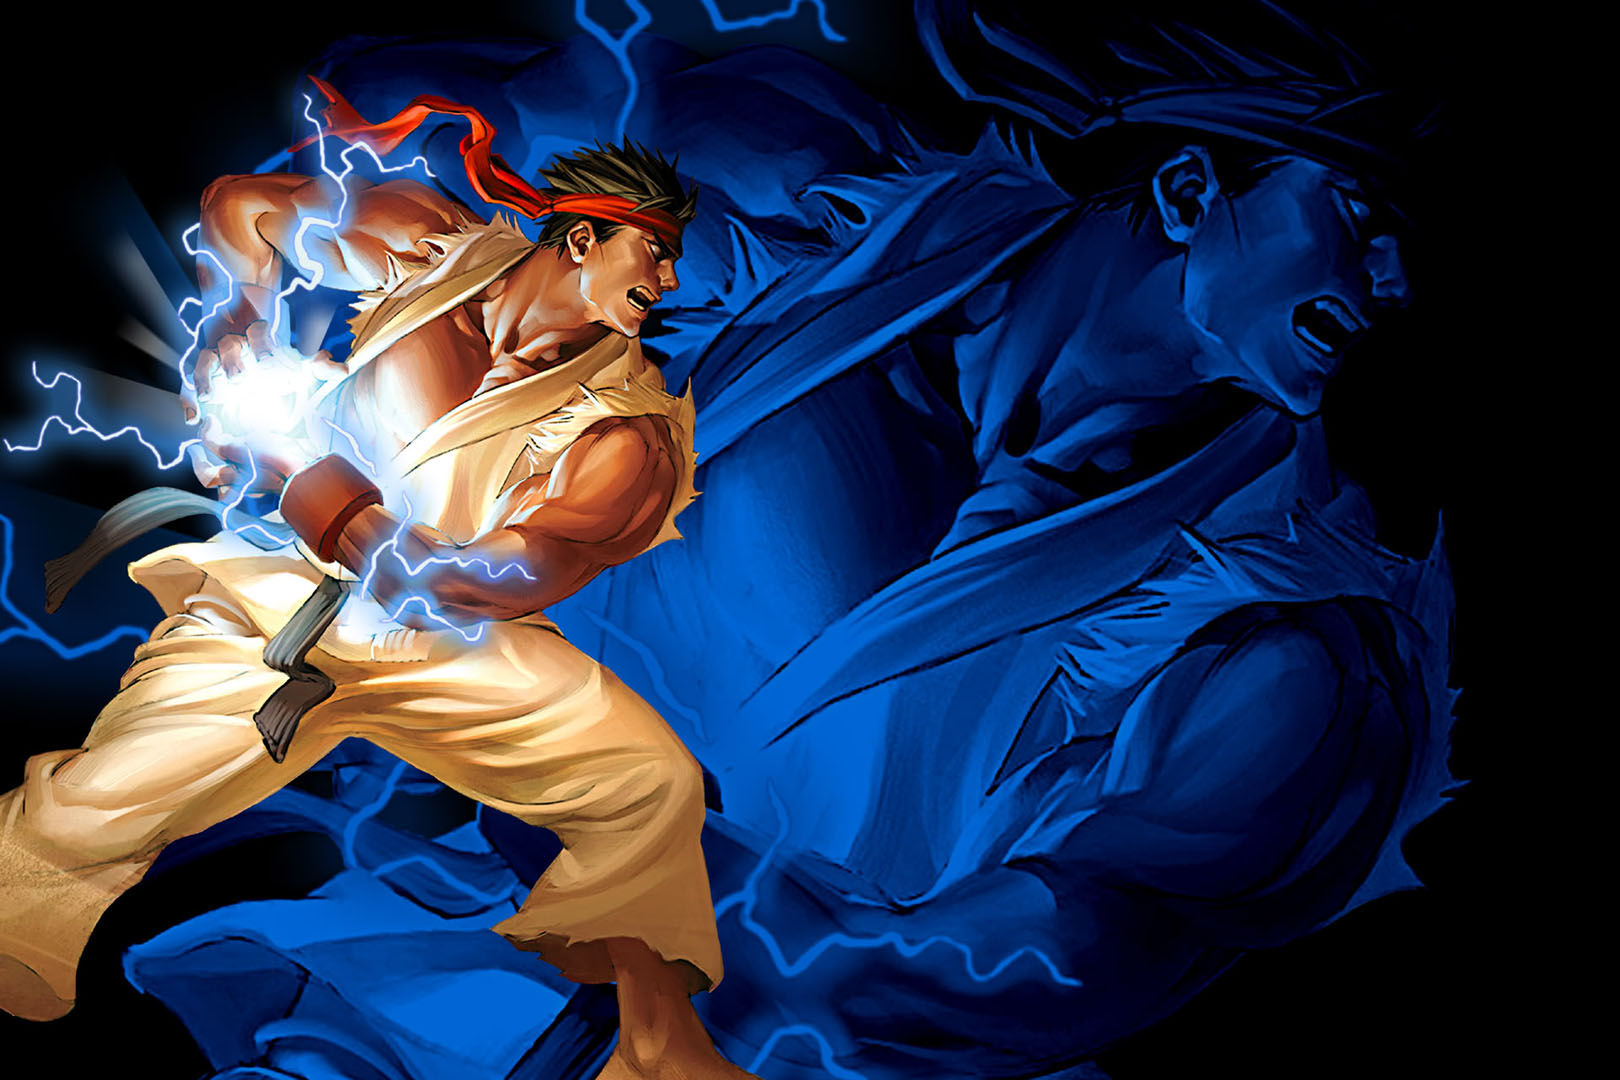 Street Fighter II Video Game HD Wallpapers | HD Wallapers for Free